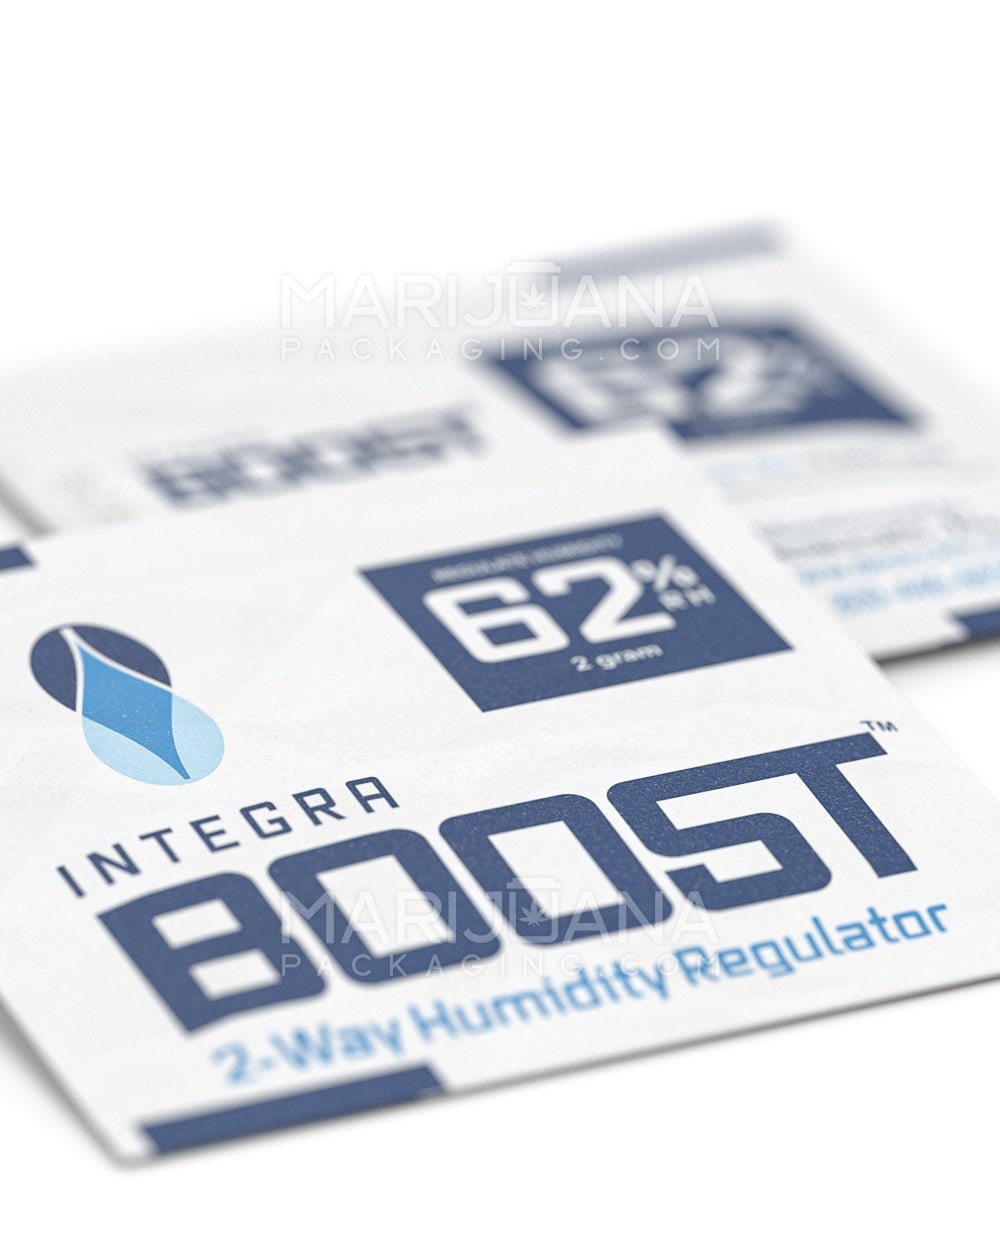 INTEGRA | Boost Humidity Control Packs | 2 Grams - 62% - 2000 Count - 4